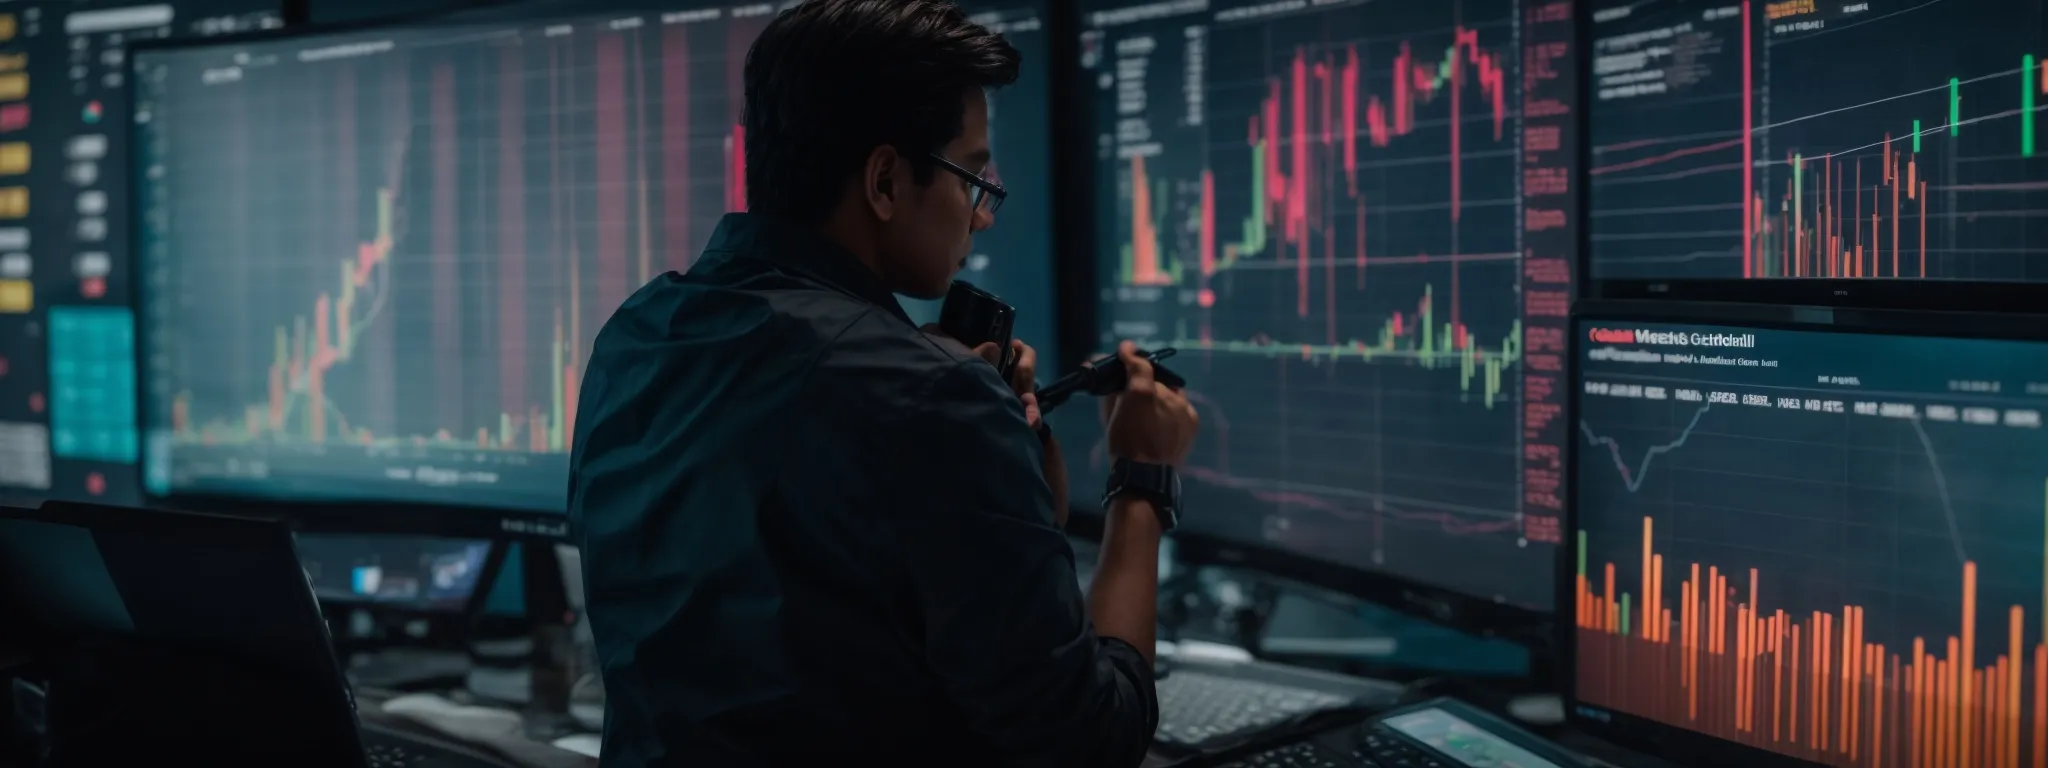 an analyst gazes intently at a large screen displaying colorful graphs and social media metrics from various analytics tools.